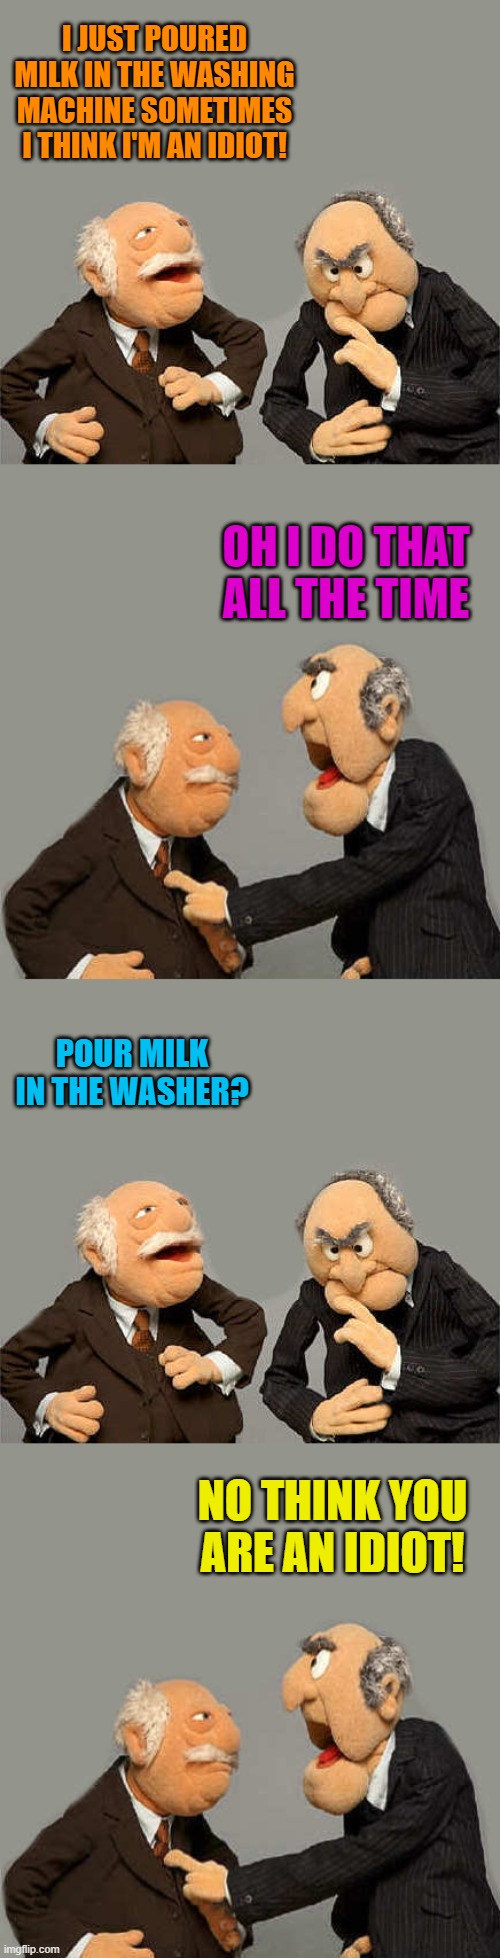 I JUST POURED MILK IN THE WASHING MACHINE SOMETIMES I THINK I'M AN IDIOT! OH I DO THAT ALL THE TIME; POUR MILK IN THE WASHER? NO THINK YOU ARE AN IDIOT! | image tagged in the meme with no name | made w/ Imgflip meme maker